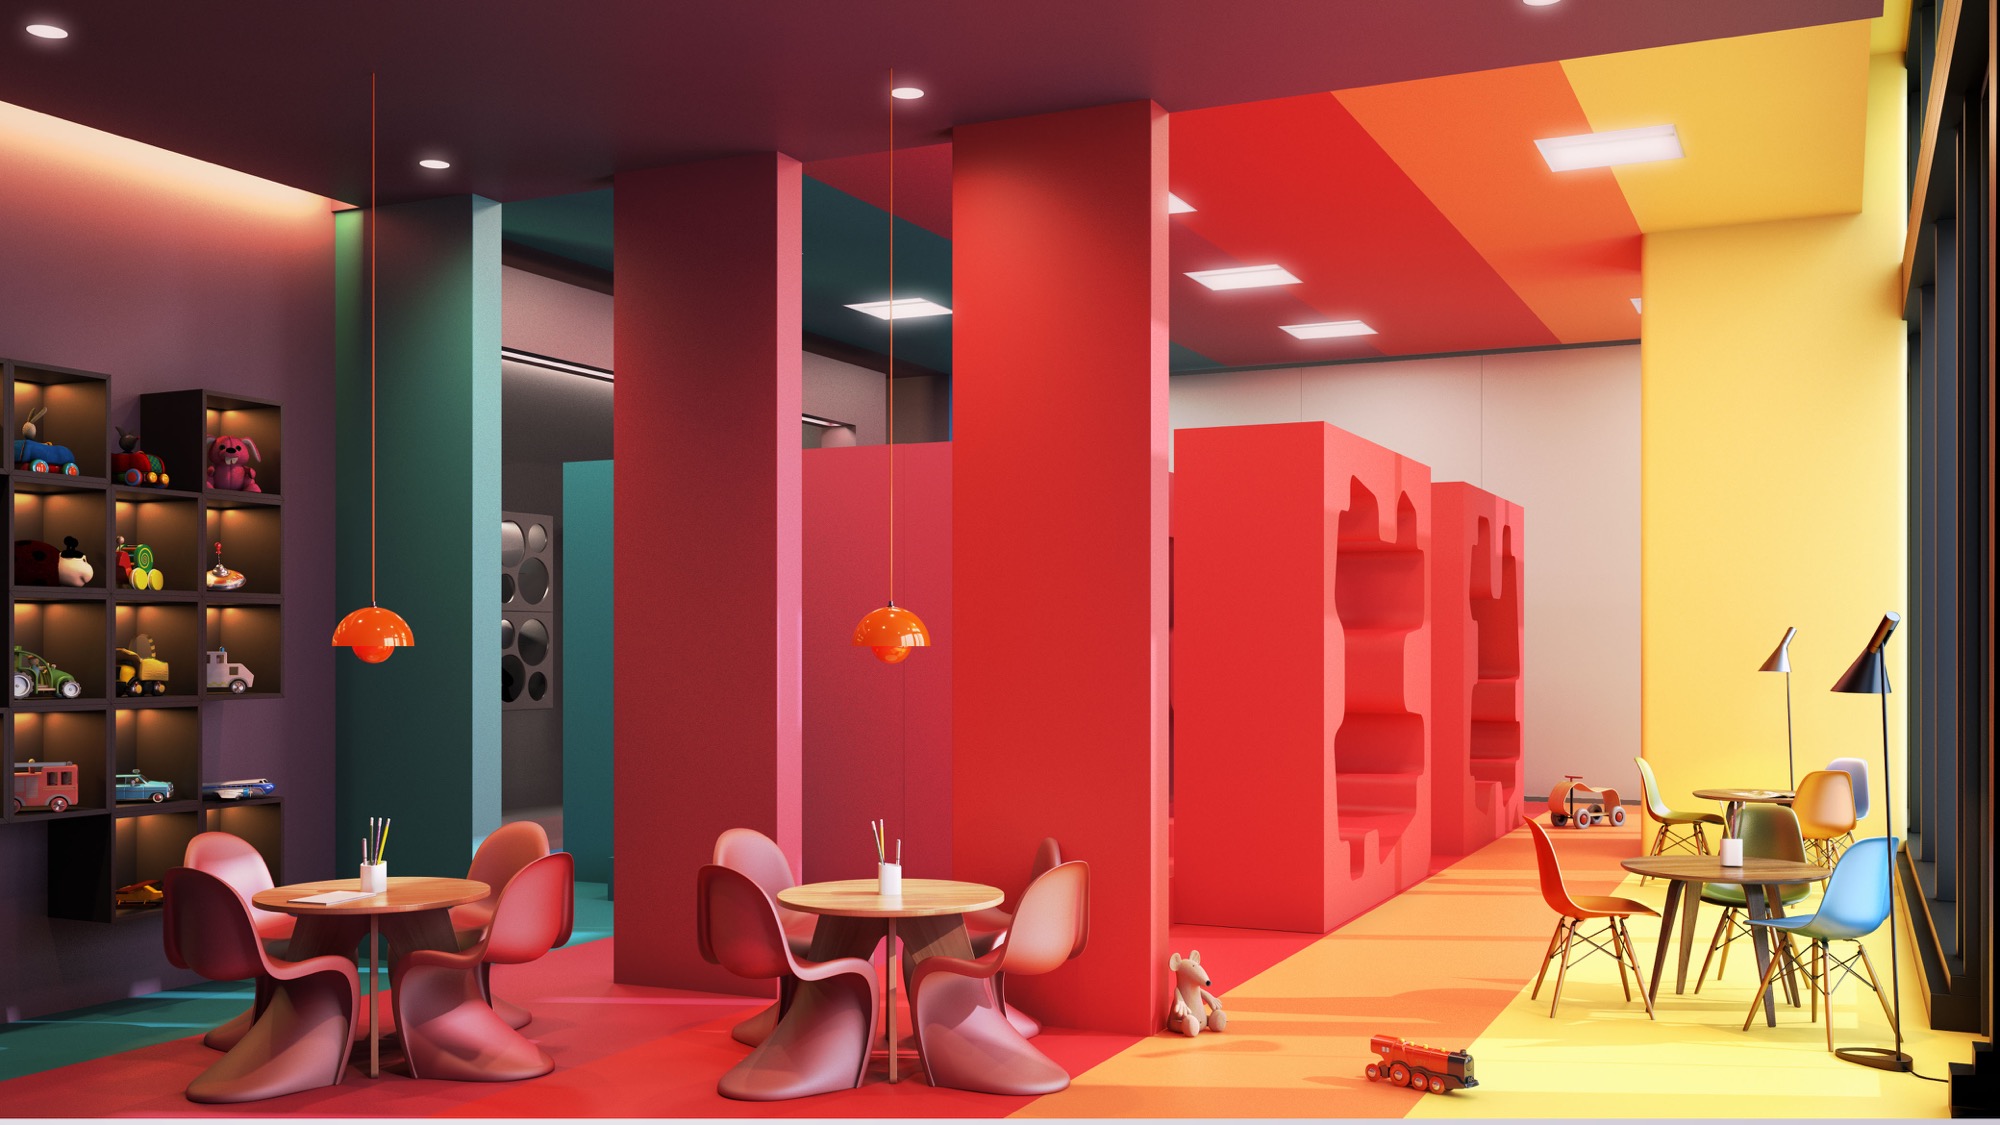 Are High-Design Playrooms the New Frontier of the Amenity Arms Race?